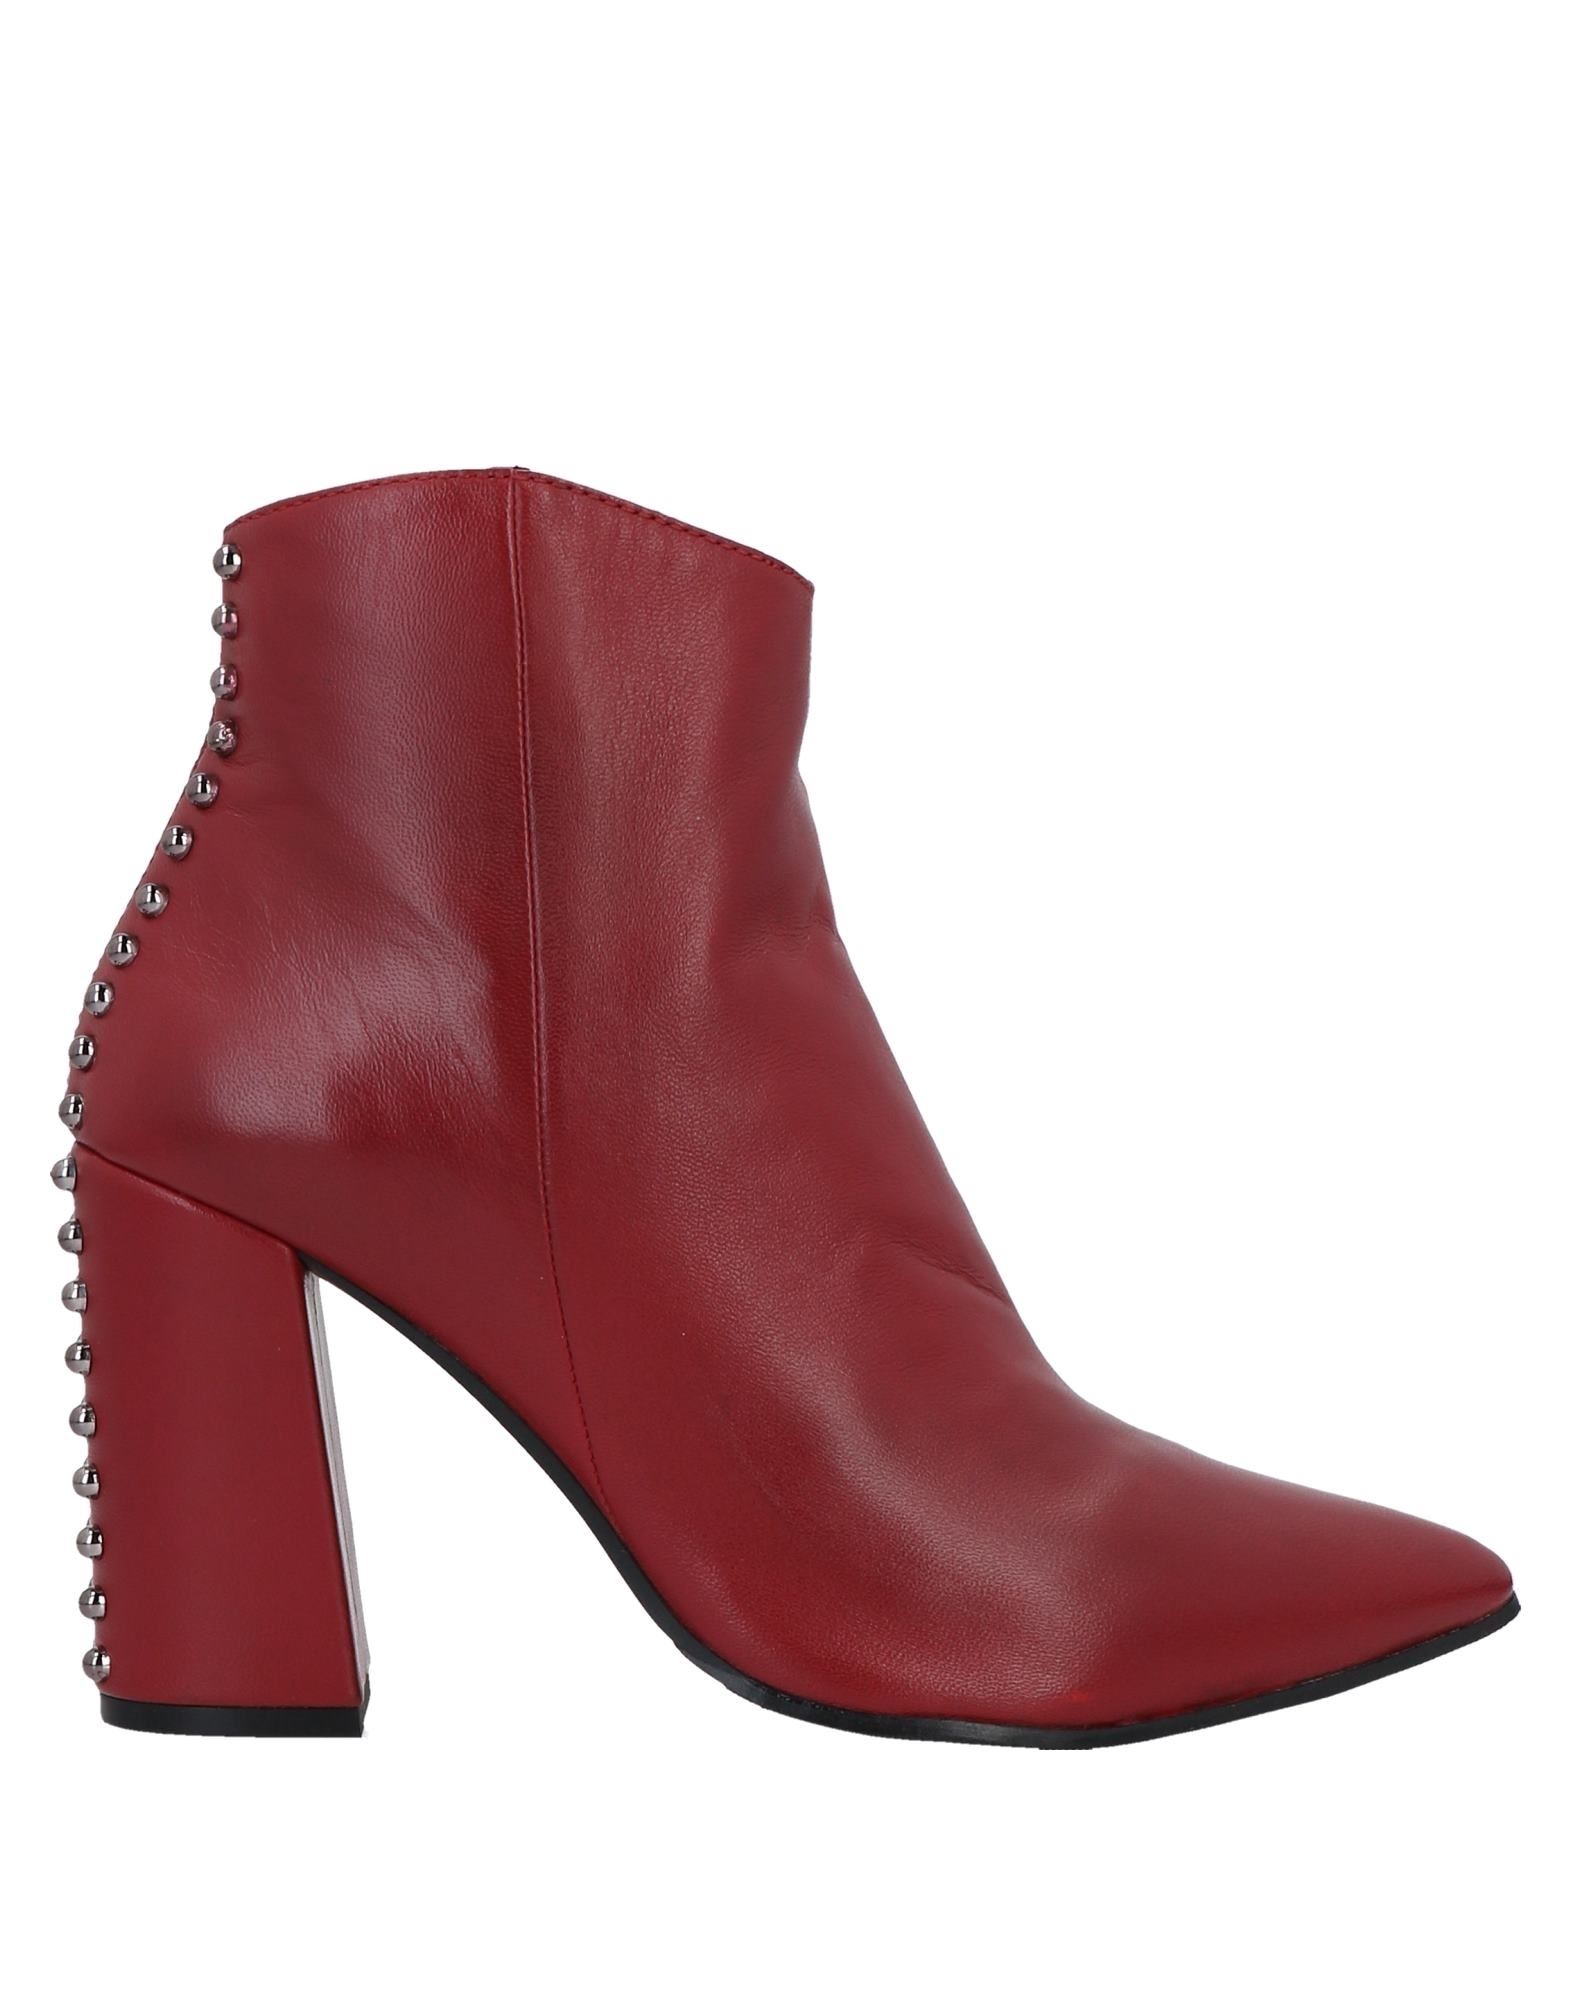 Adele Dezotti Ankle Boots In Brick Red